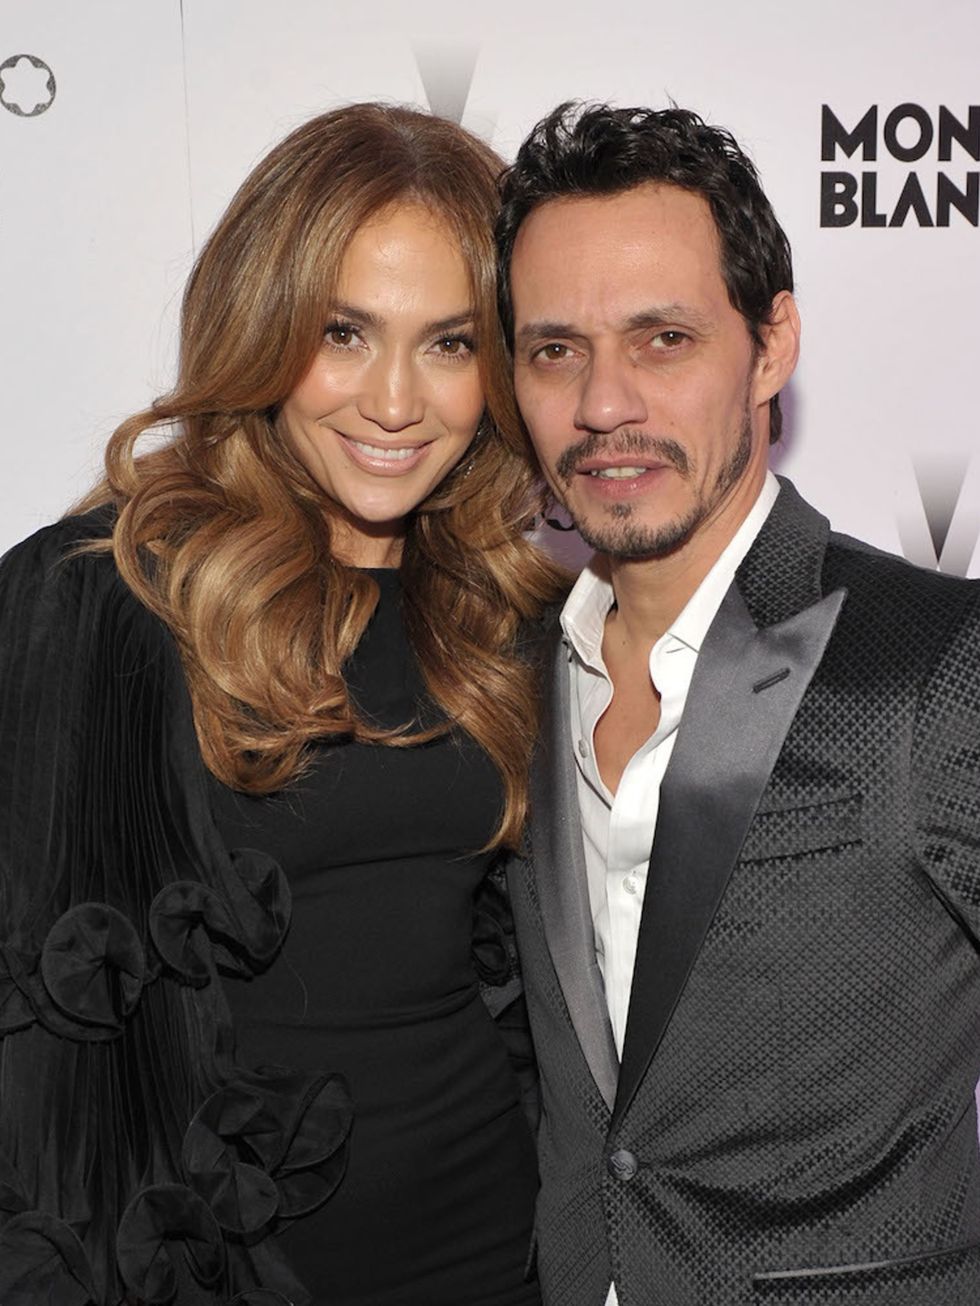 <p><strong>Jennifer Lopez </strong></p>

<p>When you have twins, you deserve two gifts, right? Marc Anthony certainly thought so, rewarding J Lo with not one, but two extravagant pieces of jewellery. The first was a $300,000 diamond ring. The second, a $2